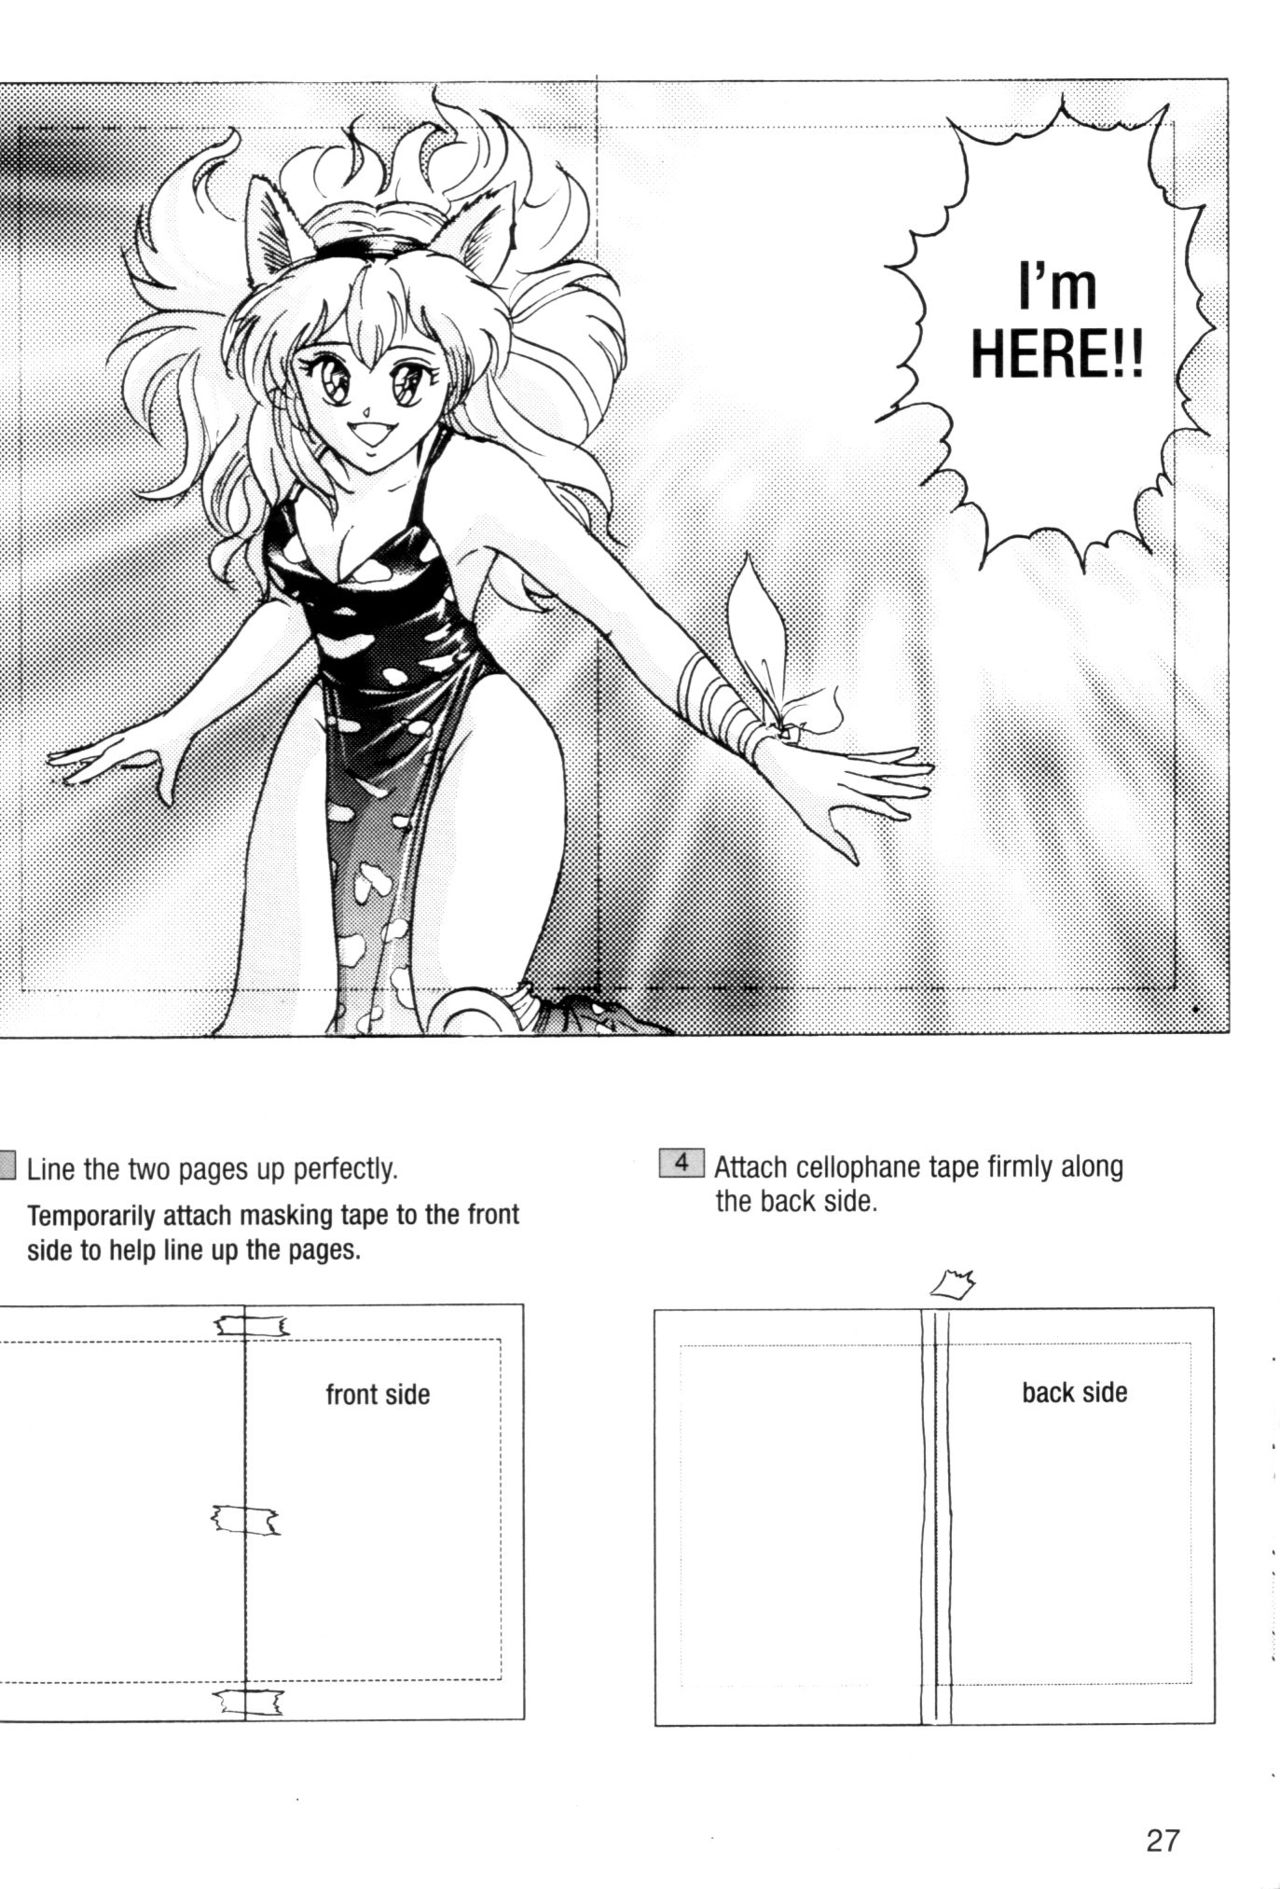 how to draw manga - getting started 25